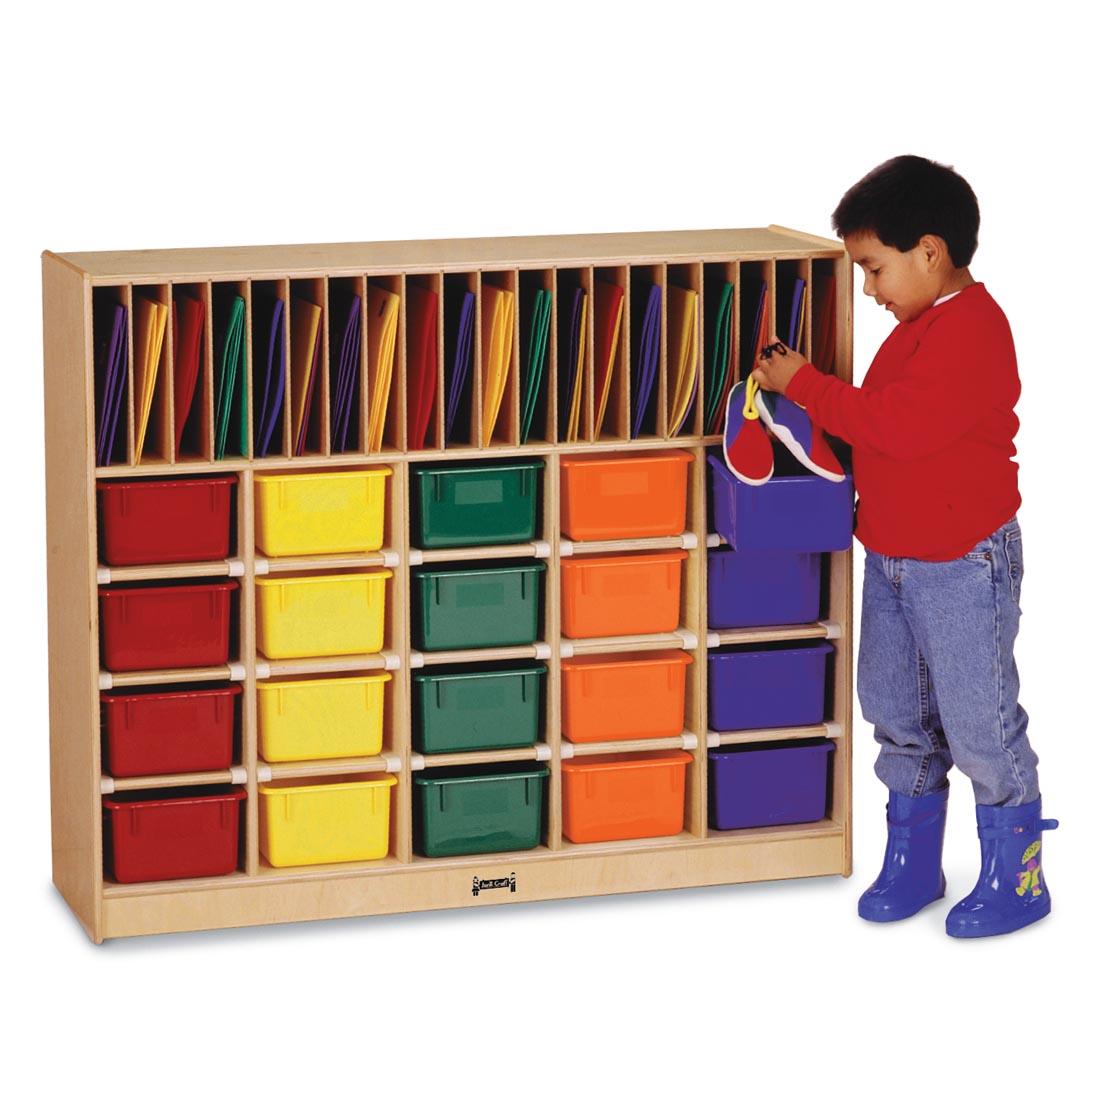 Child standing next to the Classroom Organizer With Colored Trays shown with suggested storage contents